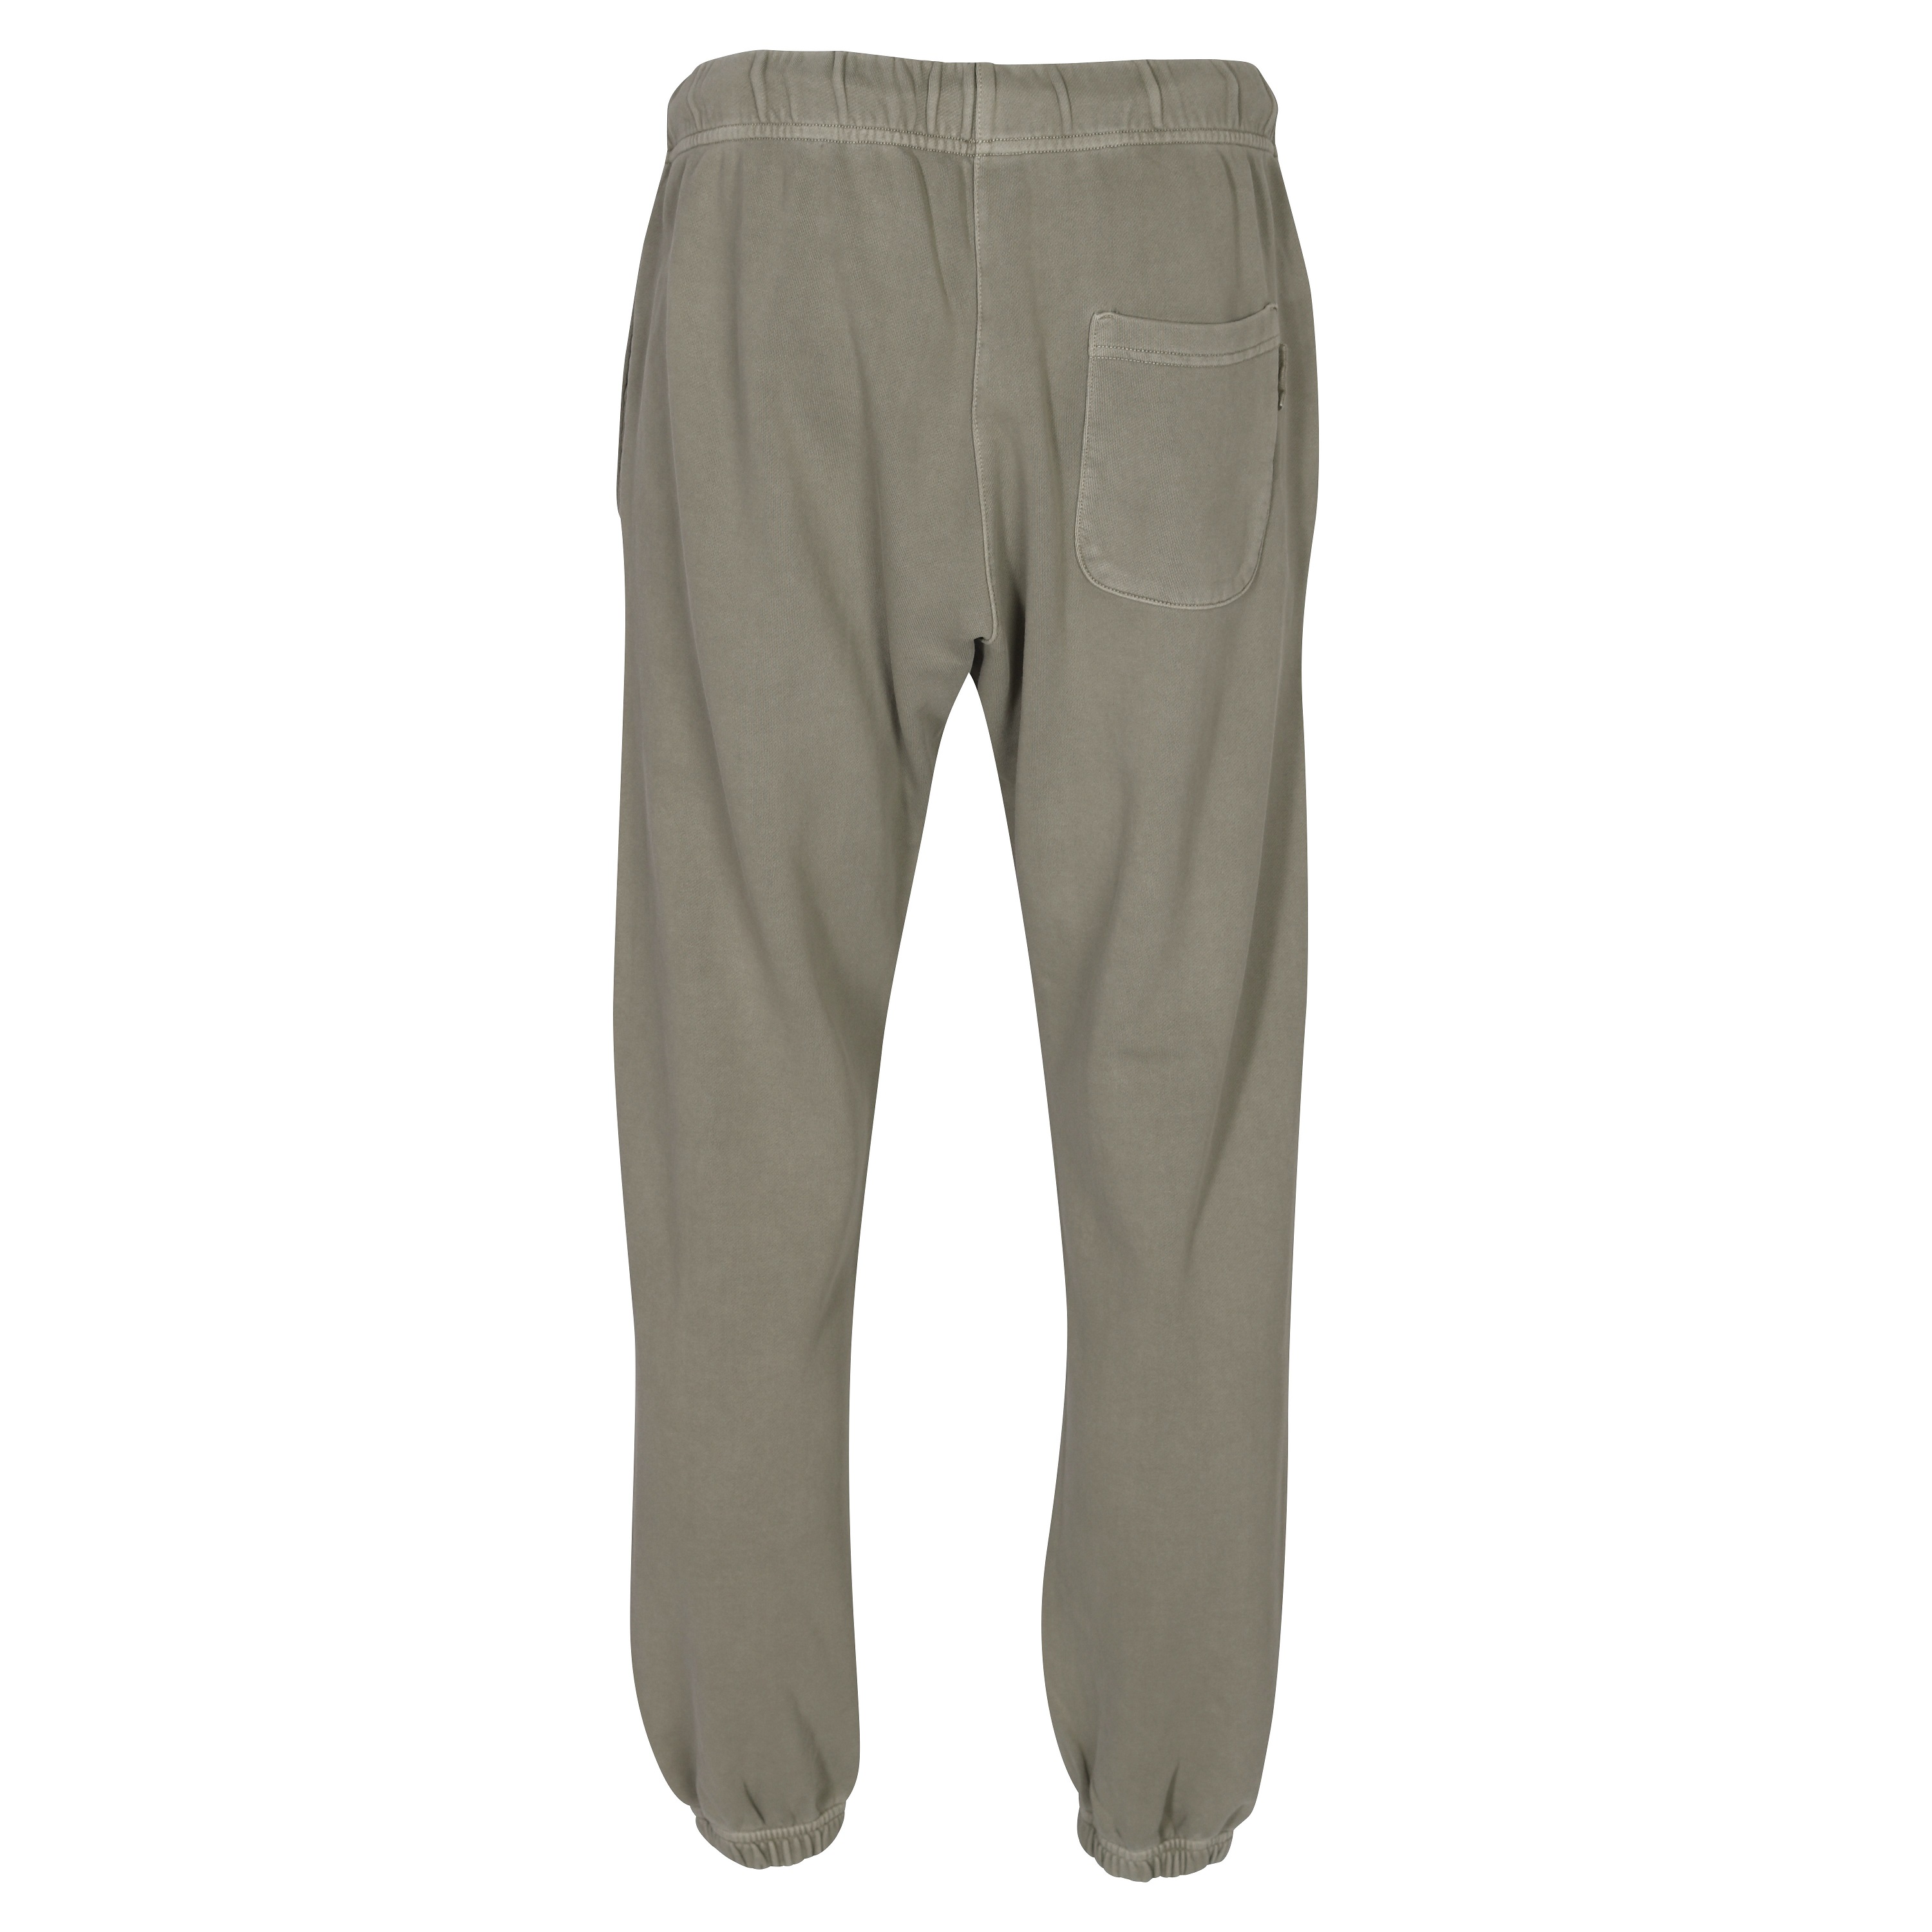 Autry Action Shoes Supervintage Pants in Tinto Light Green S